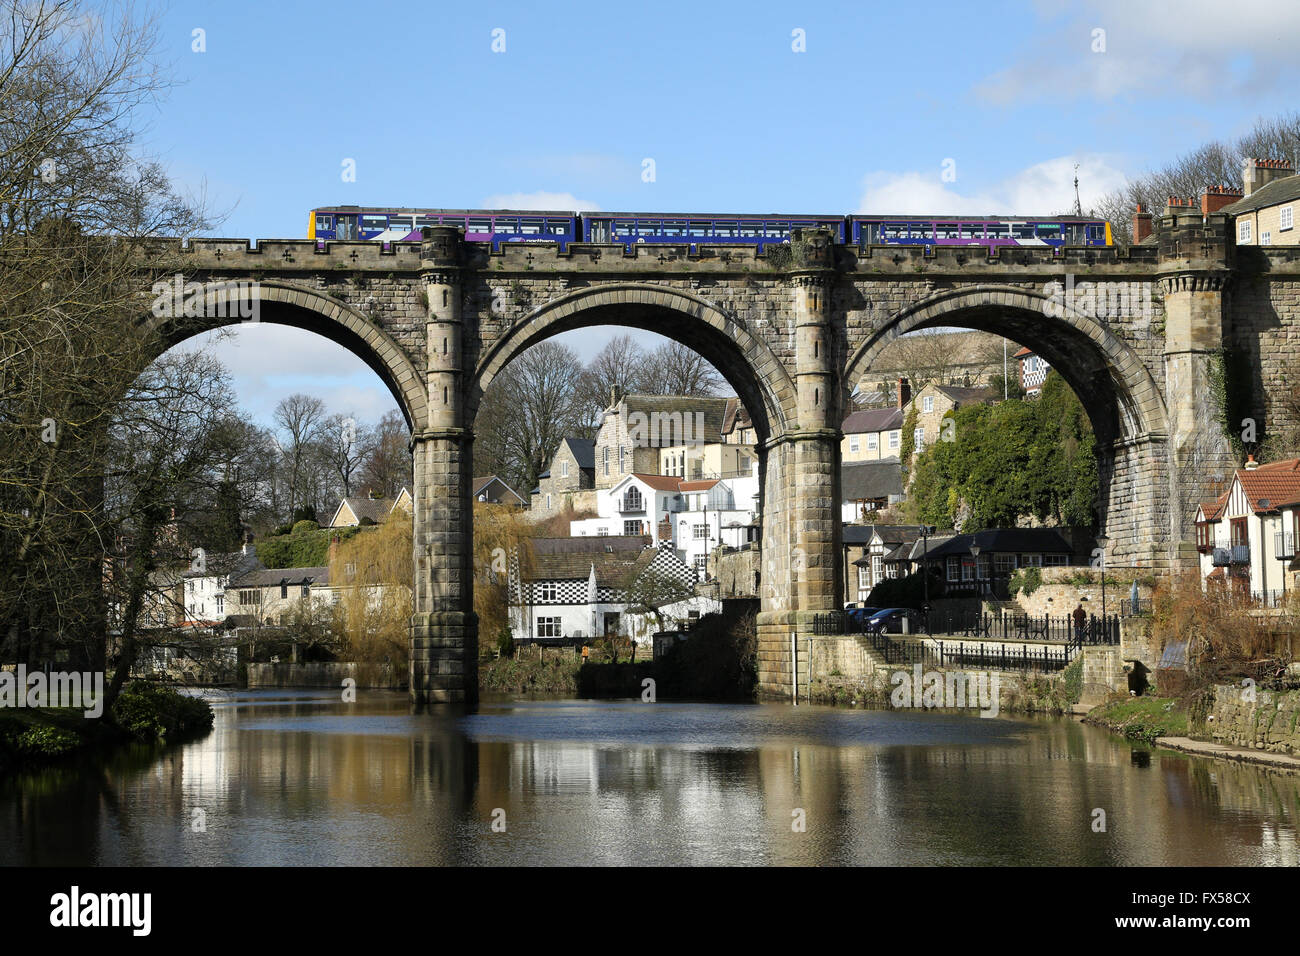 Sunshine hits a train as it crosses the River Nidd on the elegant viaduct in Knaresborough, North Yorkshire. Stock Photo